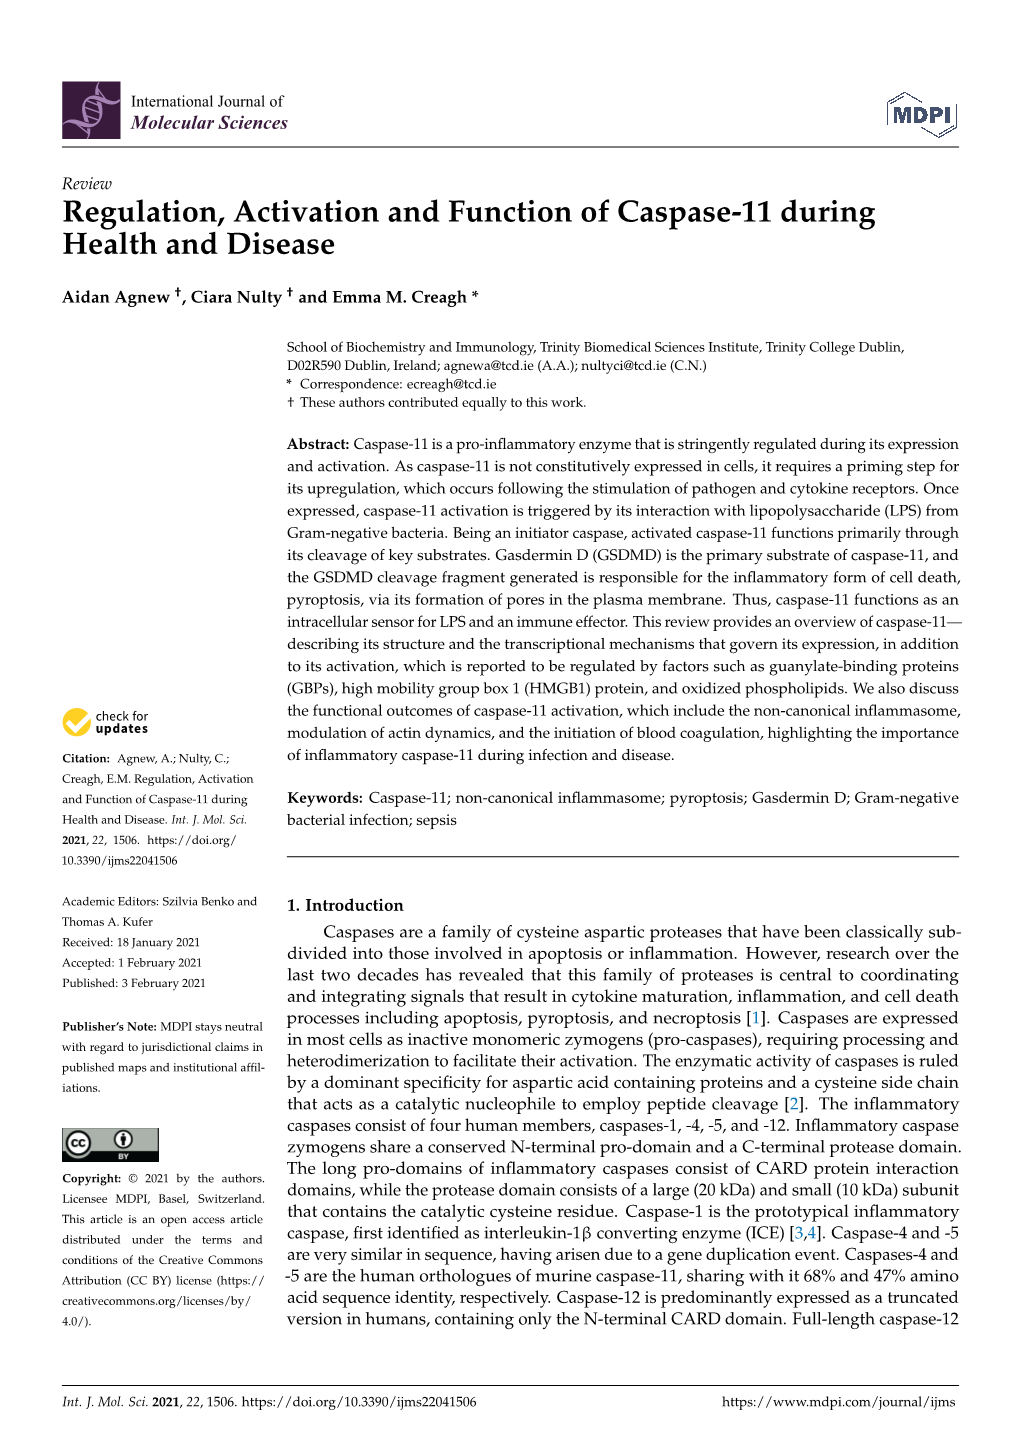 Regulation, Activation and Function of Caspase-11 During Health and Disease